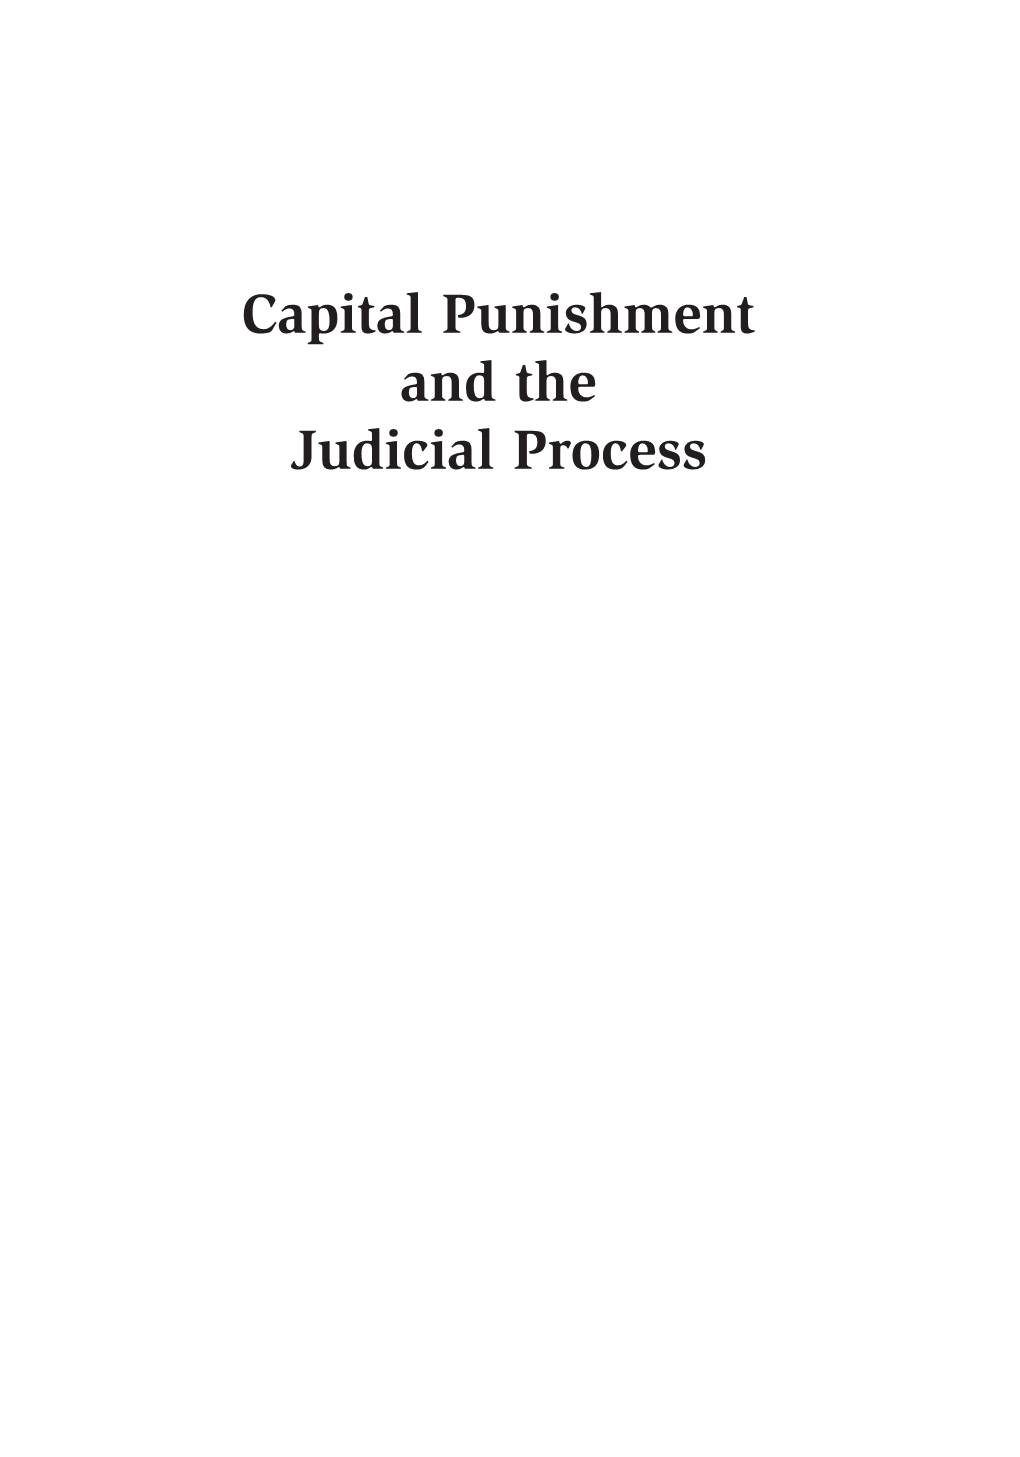 Capital Punishment and the Judicial Process 00 Coyne 4E Final 6/6/12 2:50 PM Page Ii